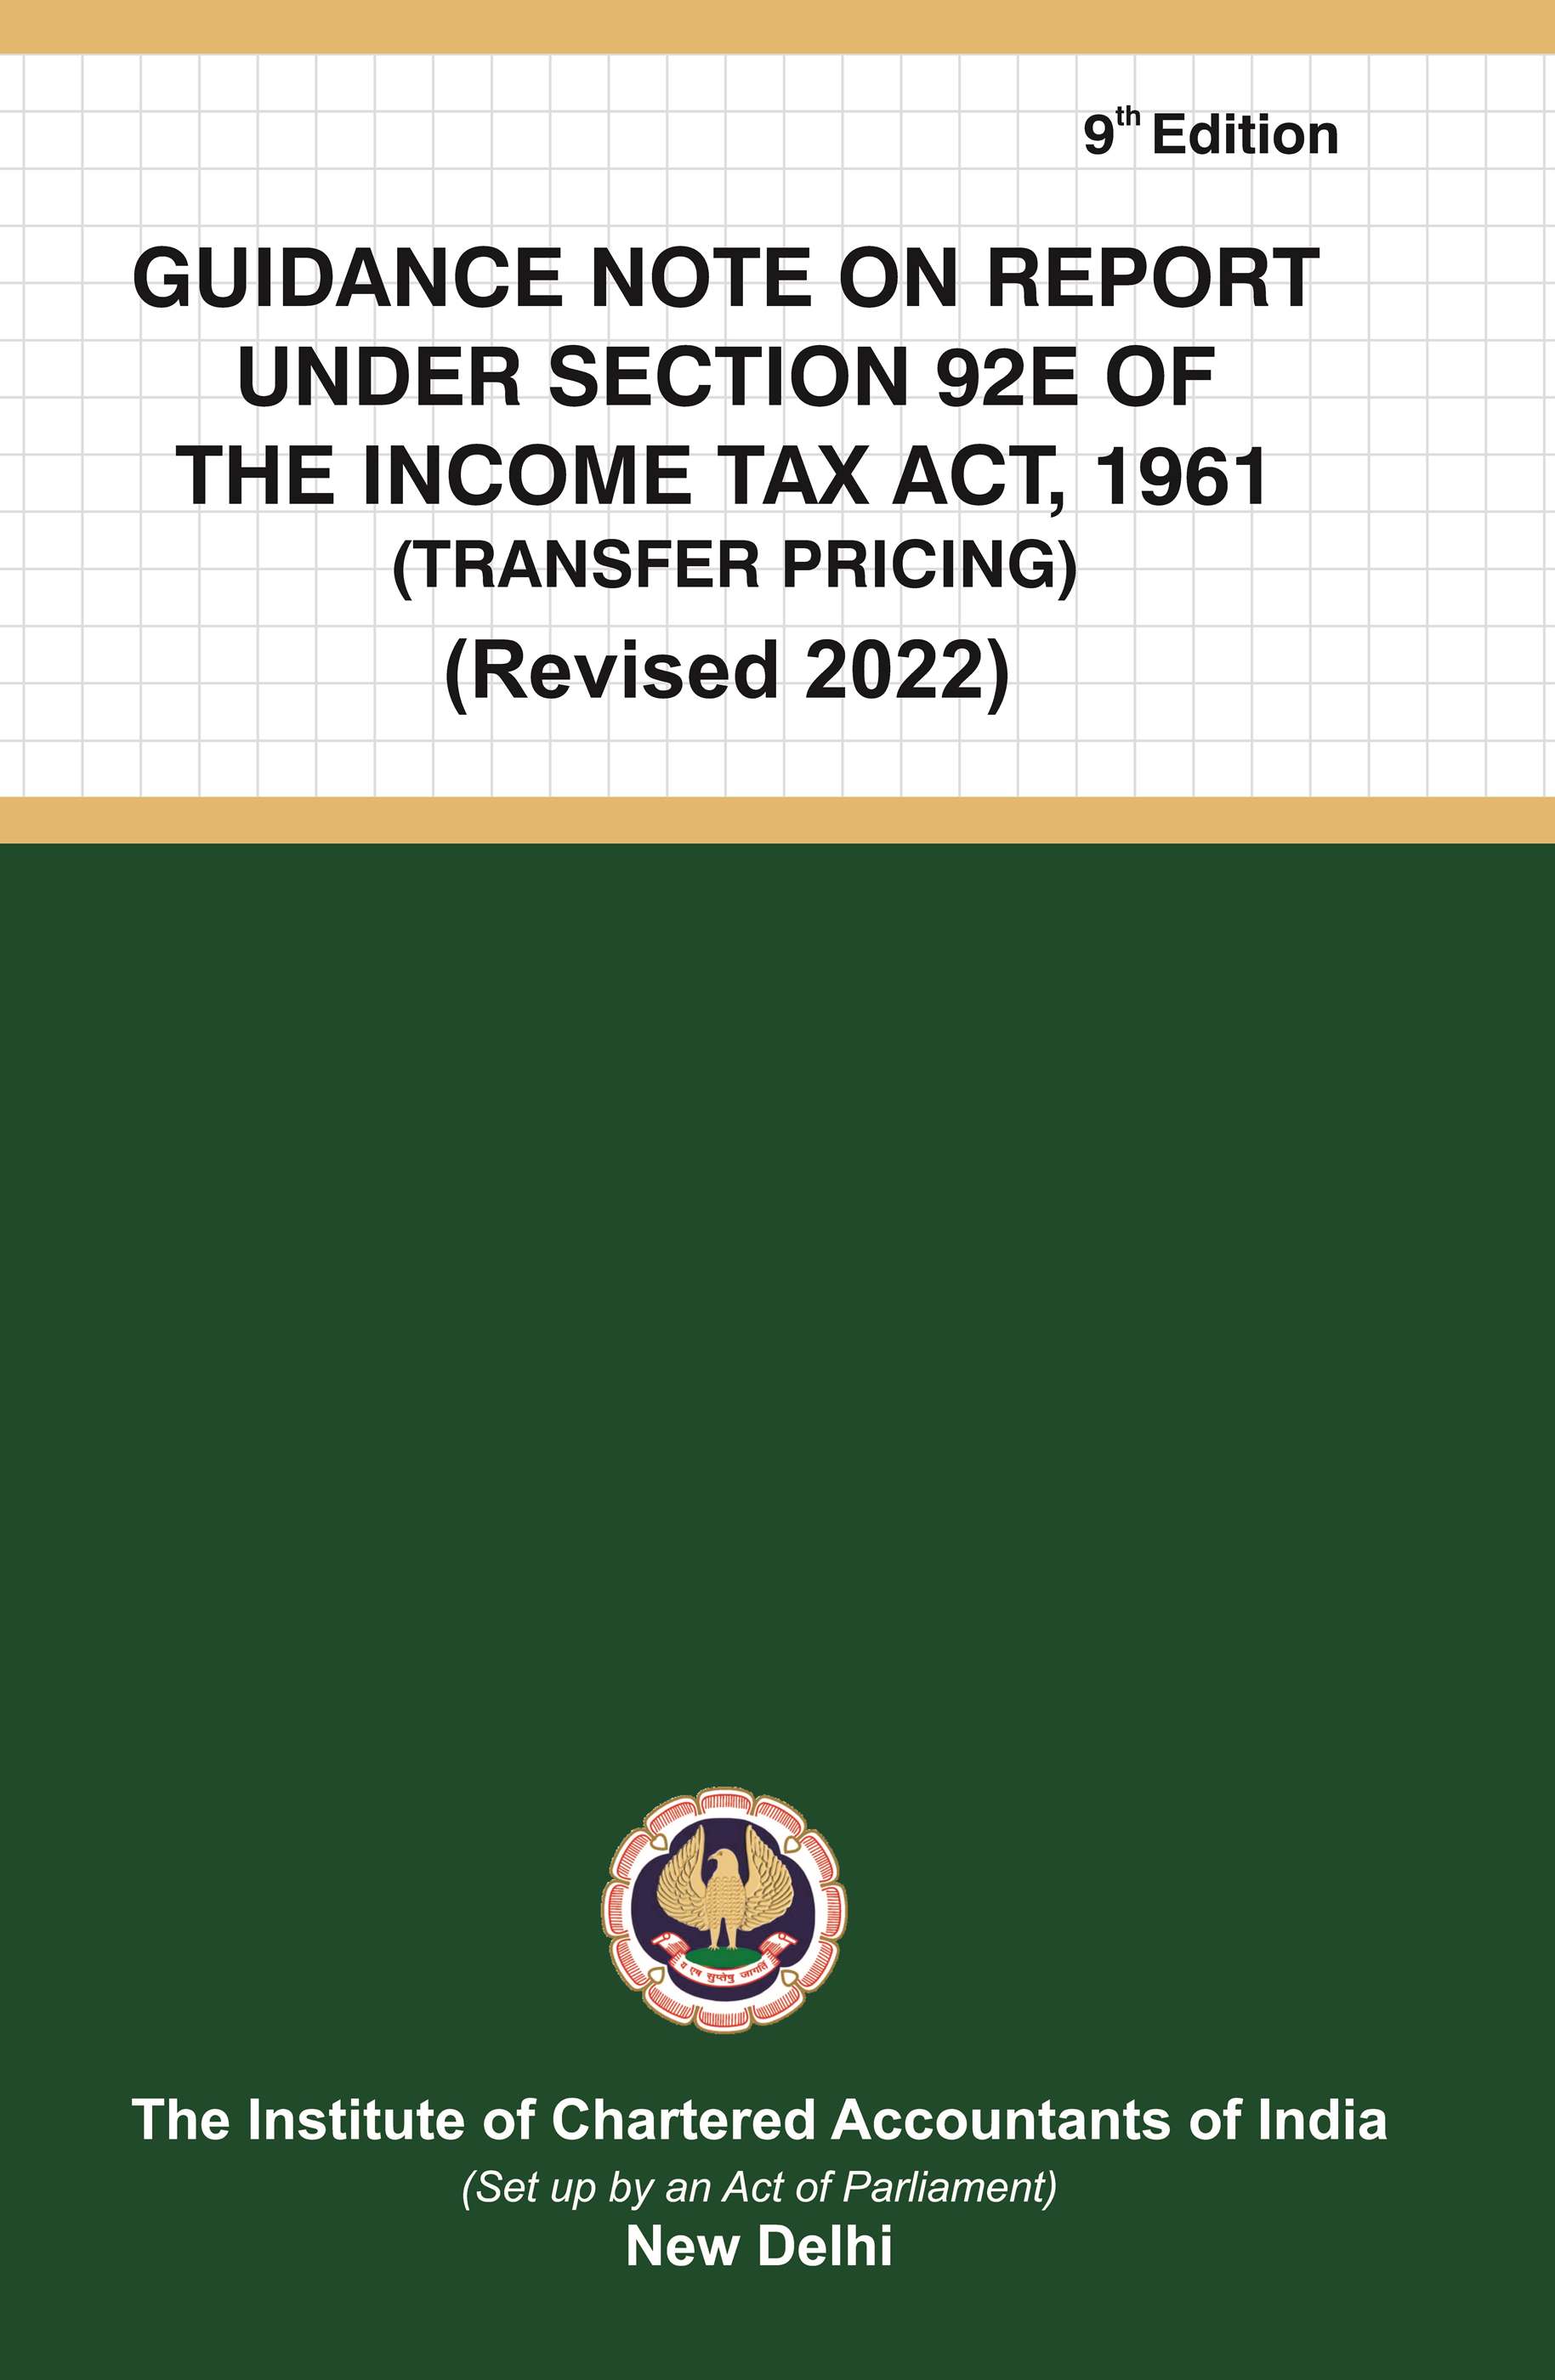 Guidance Note on Report Under Section 92E of the Income Tax Act, 1961 (Transfer Pricing) (Revised 2022)